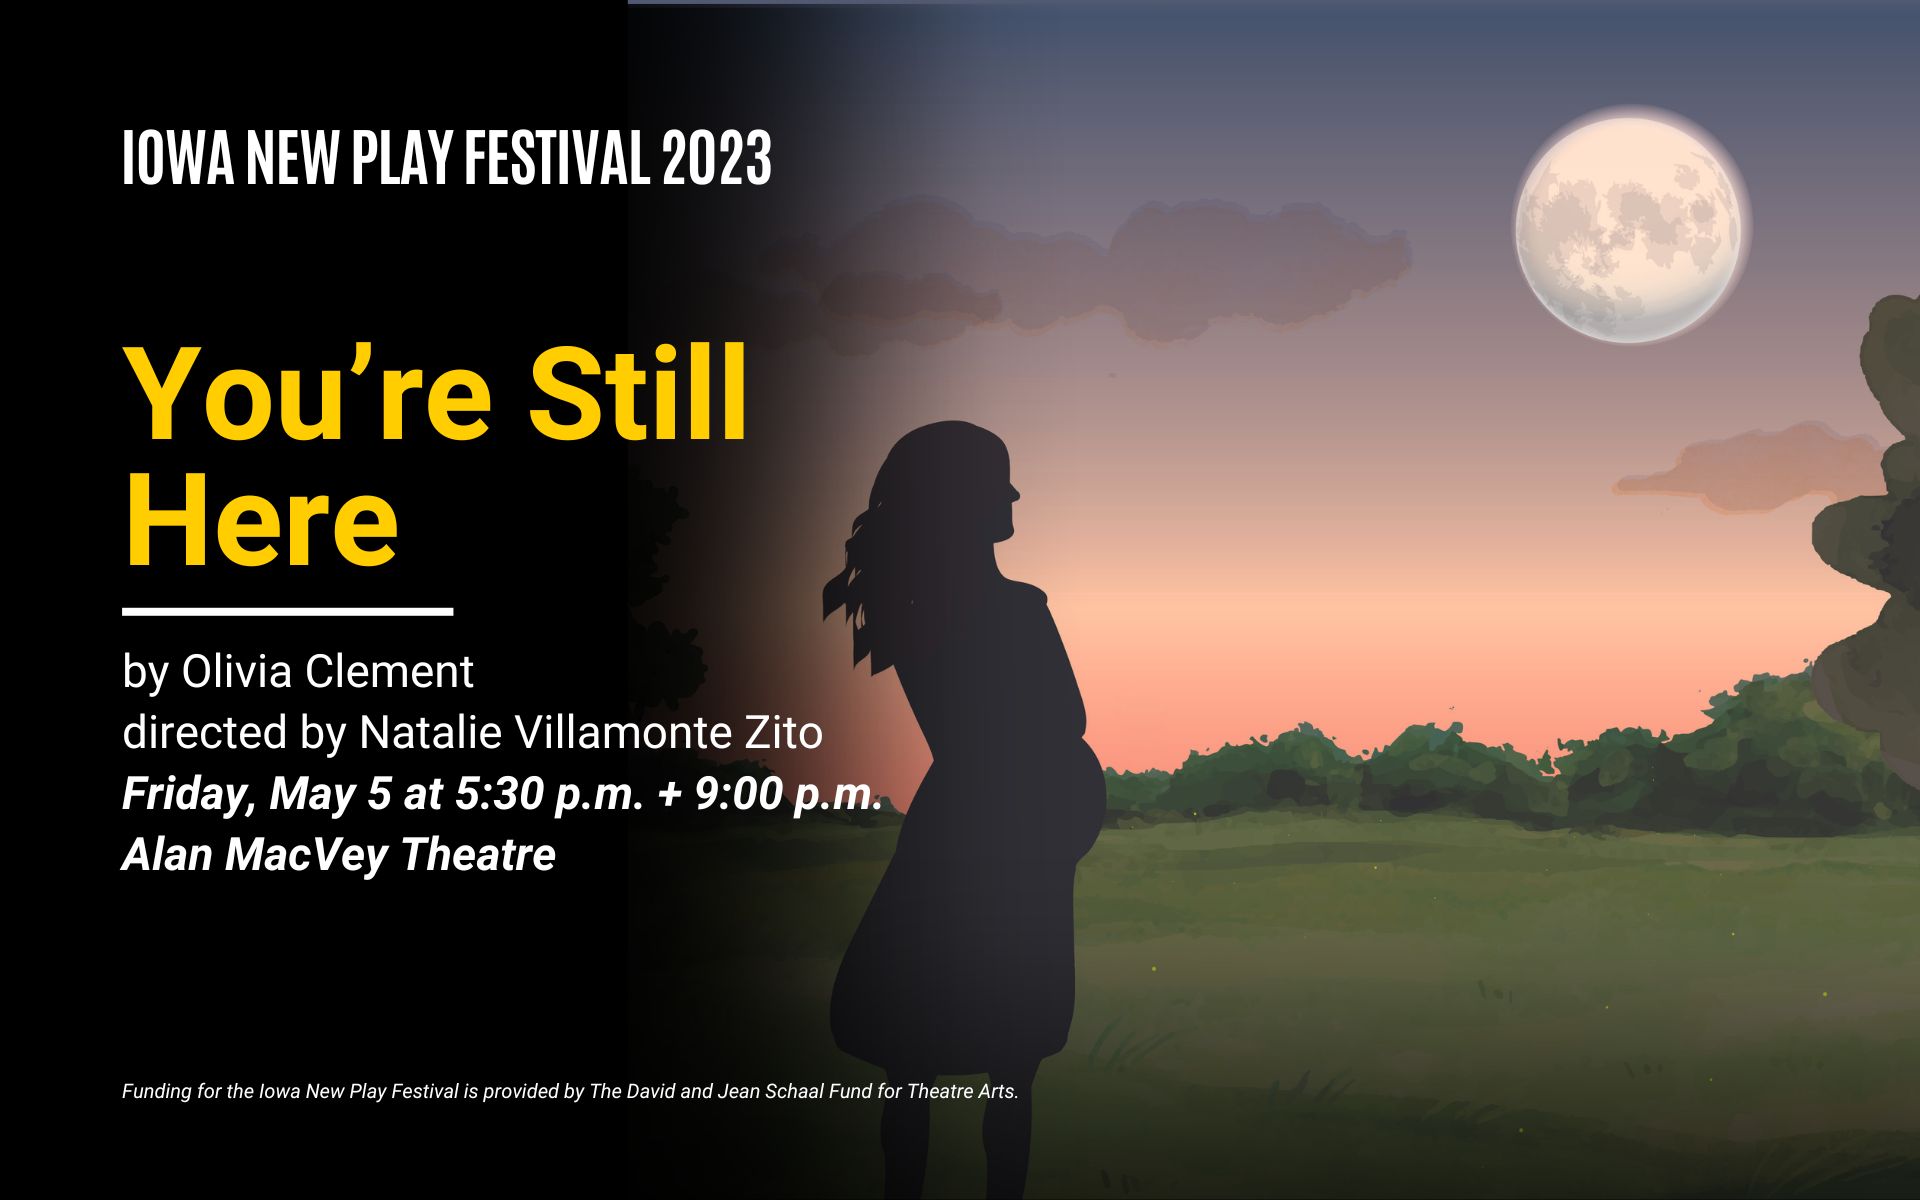 Iowa New Play Festival 2023 - You're Still Here